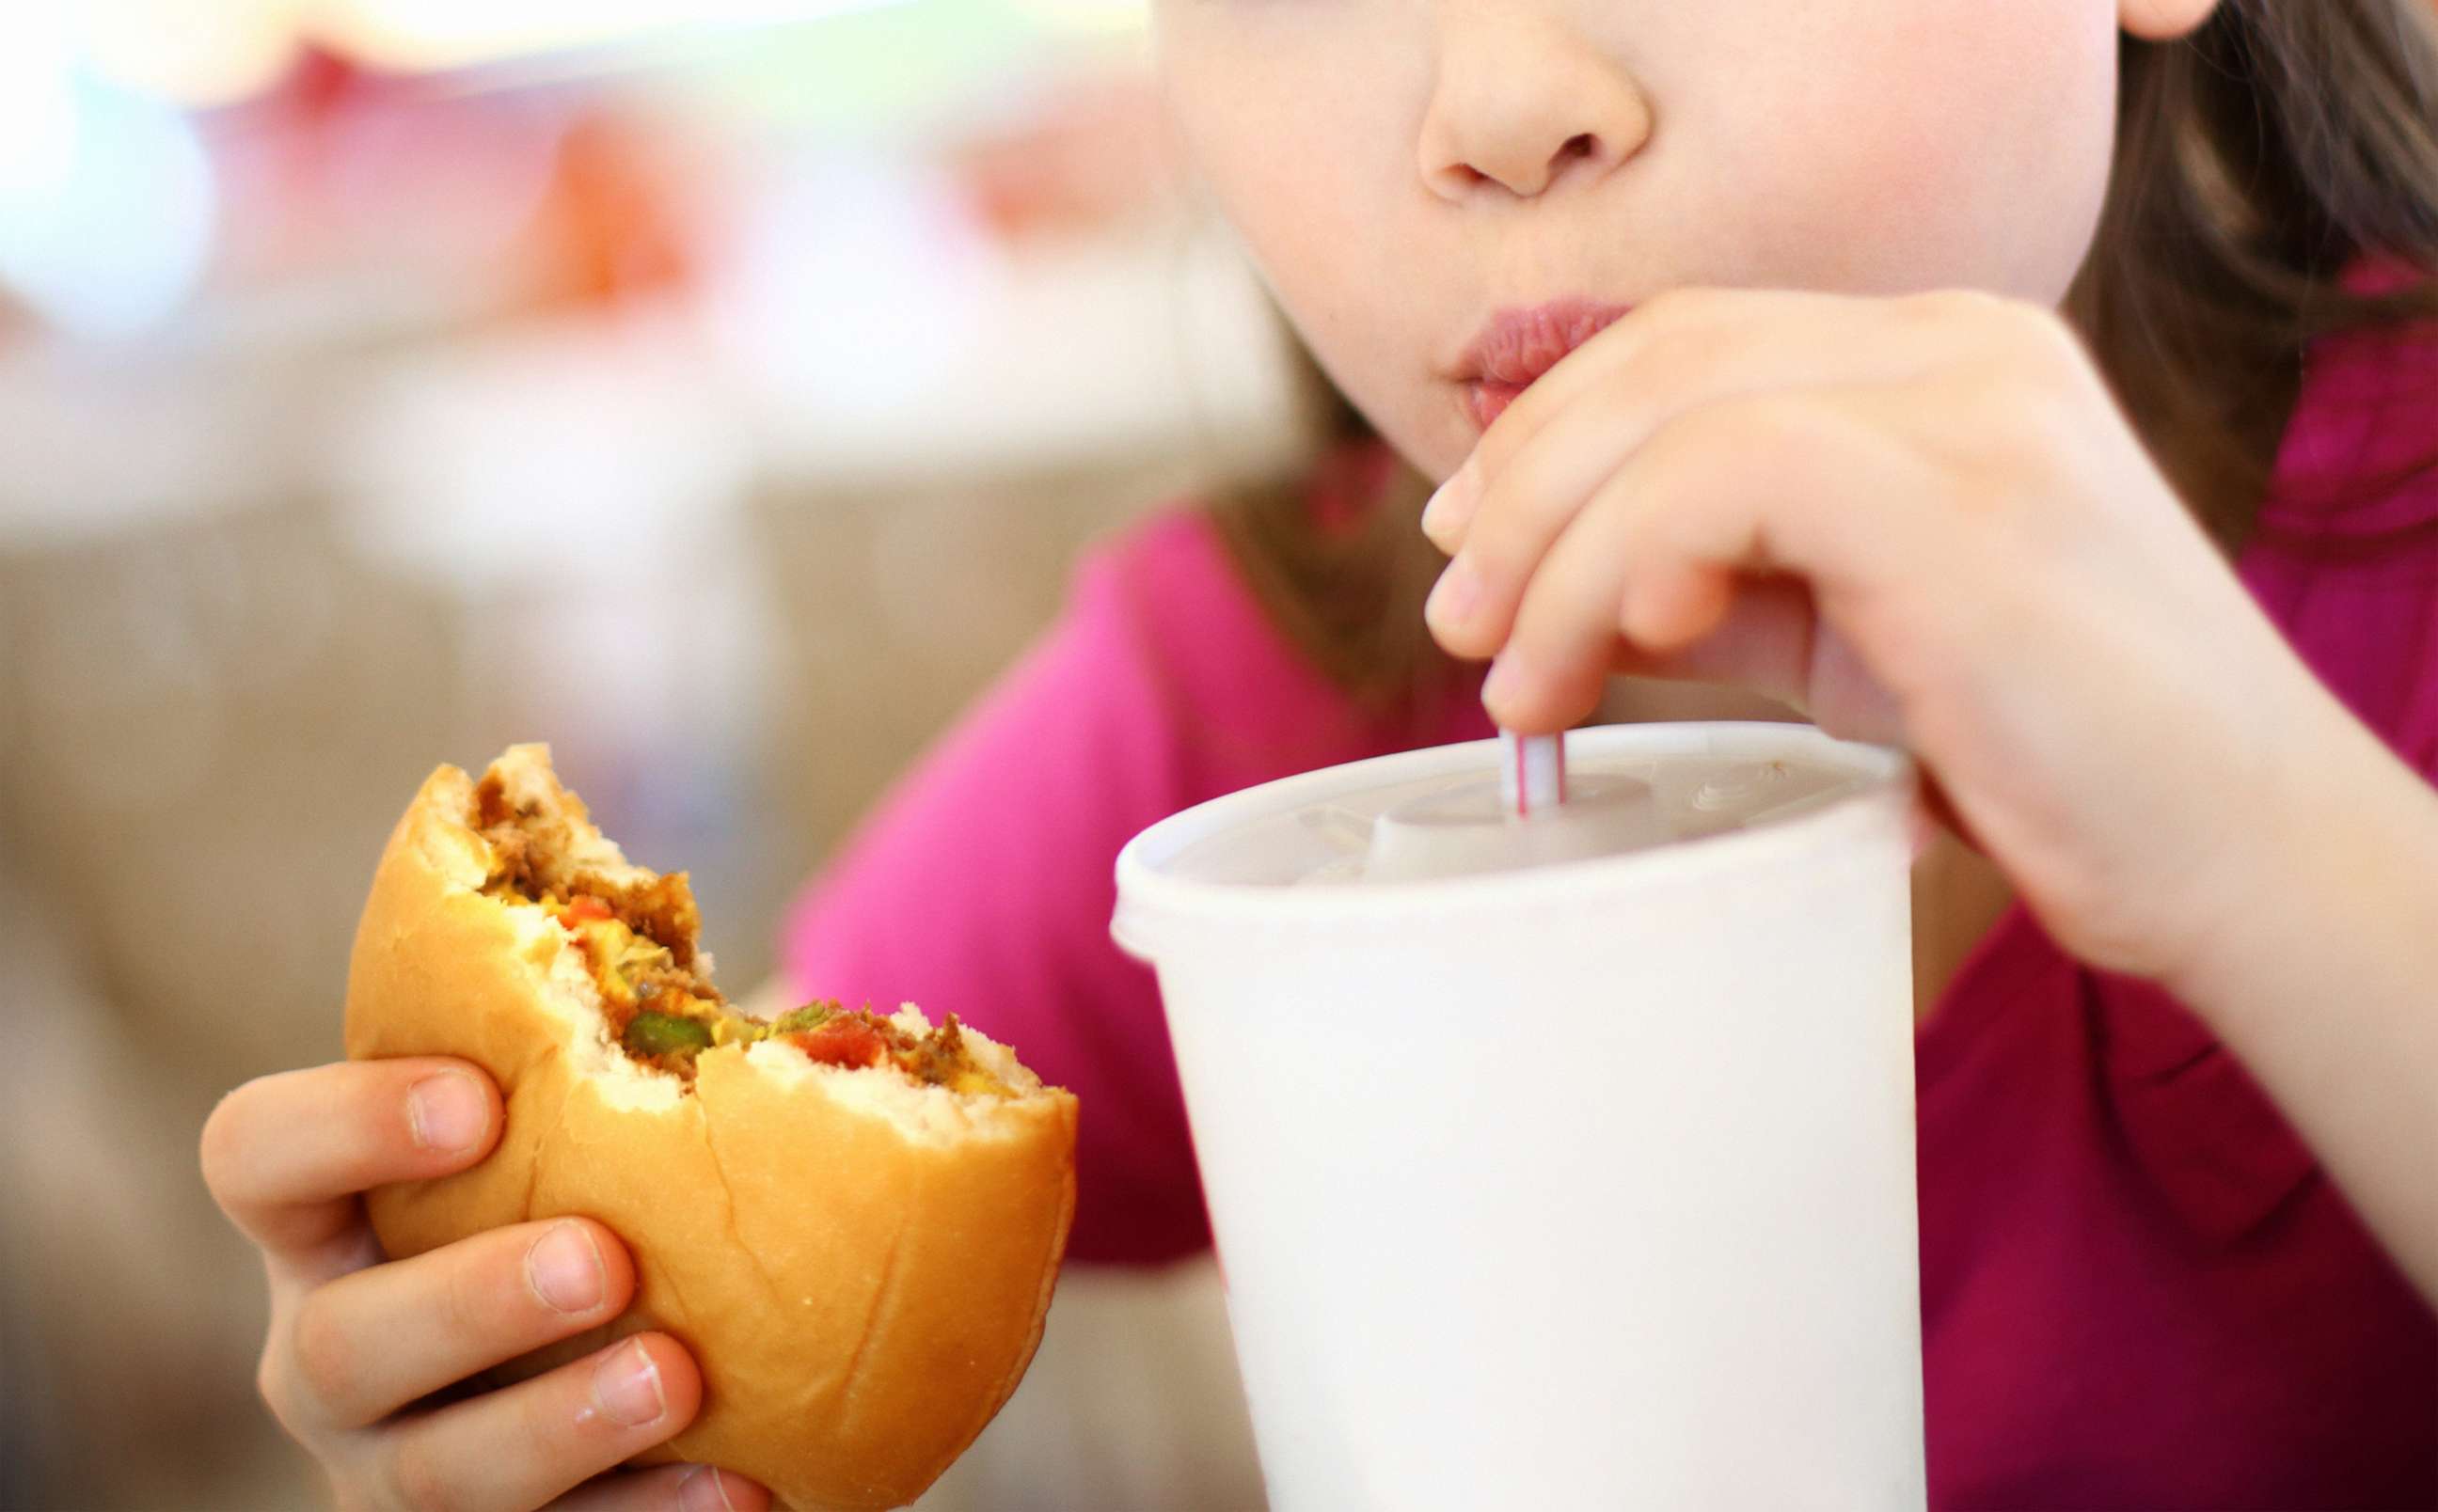 PHOTO: A girl eats a burger with a drink in this undated stock photo.